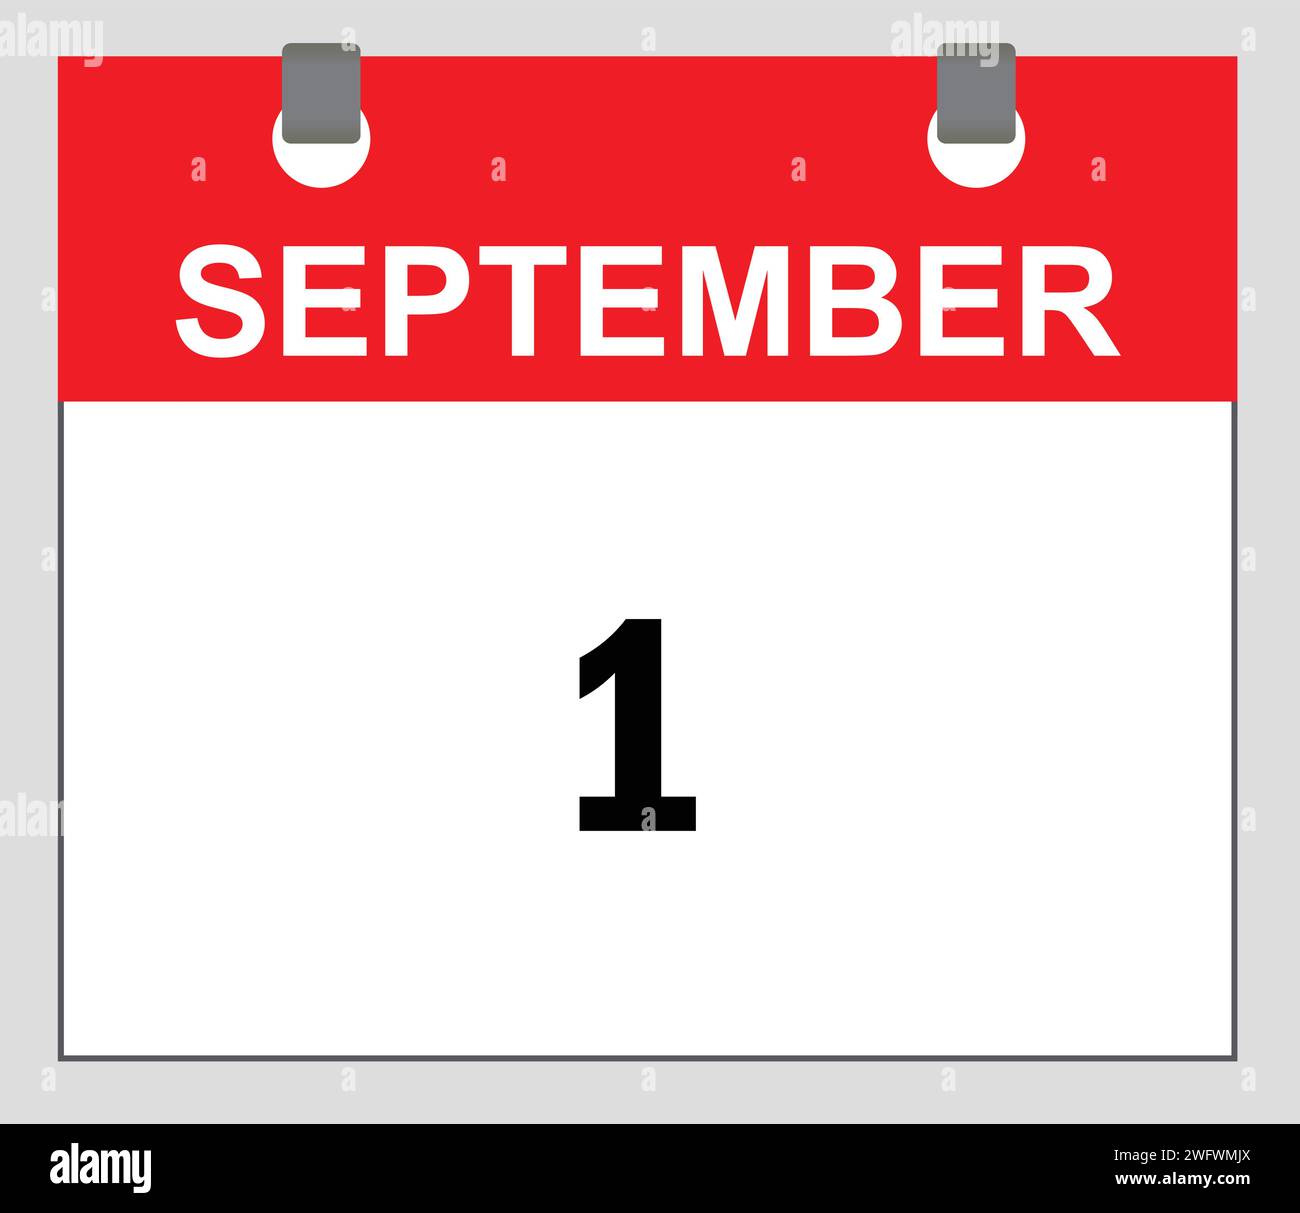 September first, Calendar icon Red and white, calender vector, date icon symbol, Schedule icon, Stock Vector